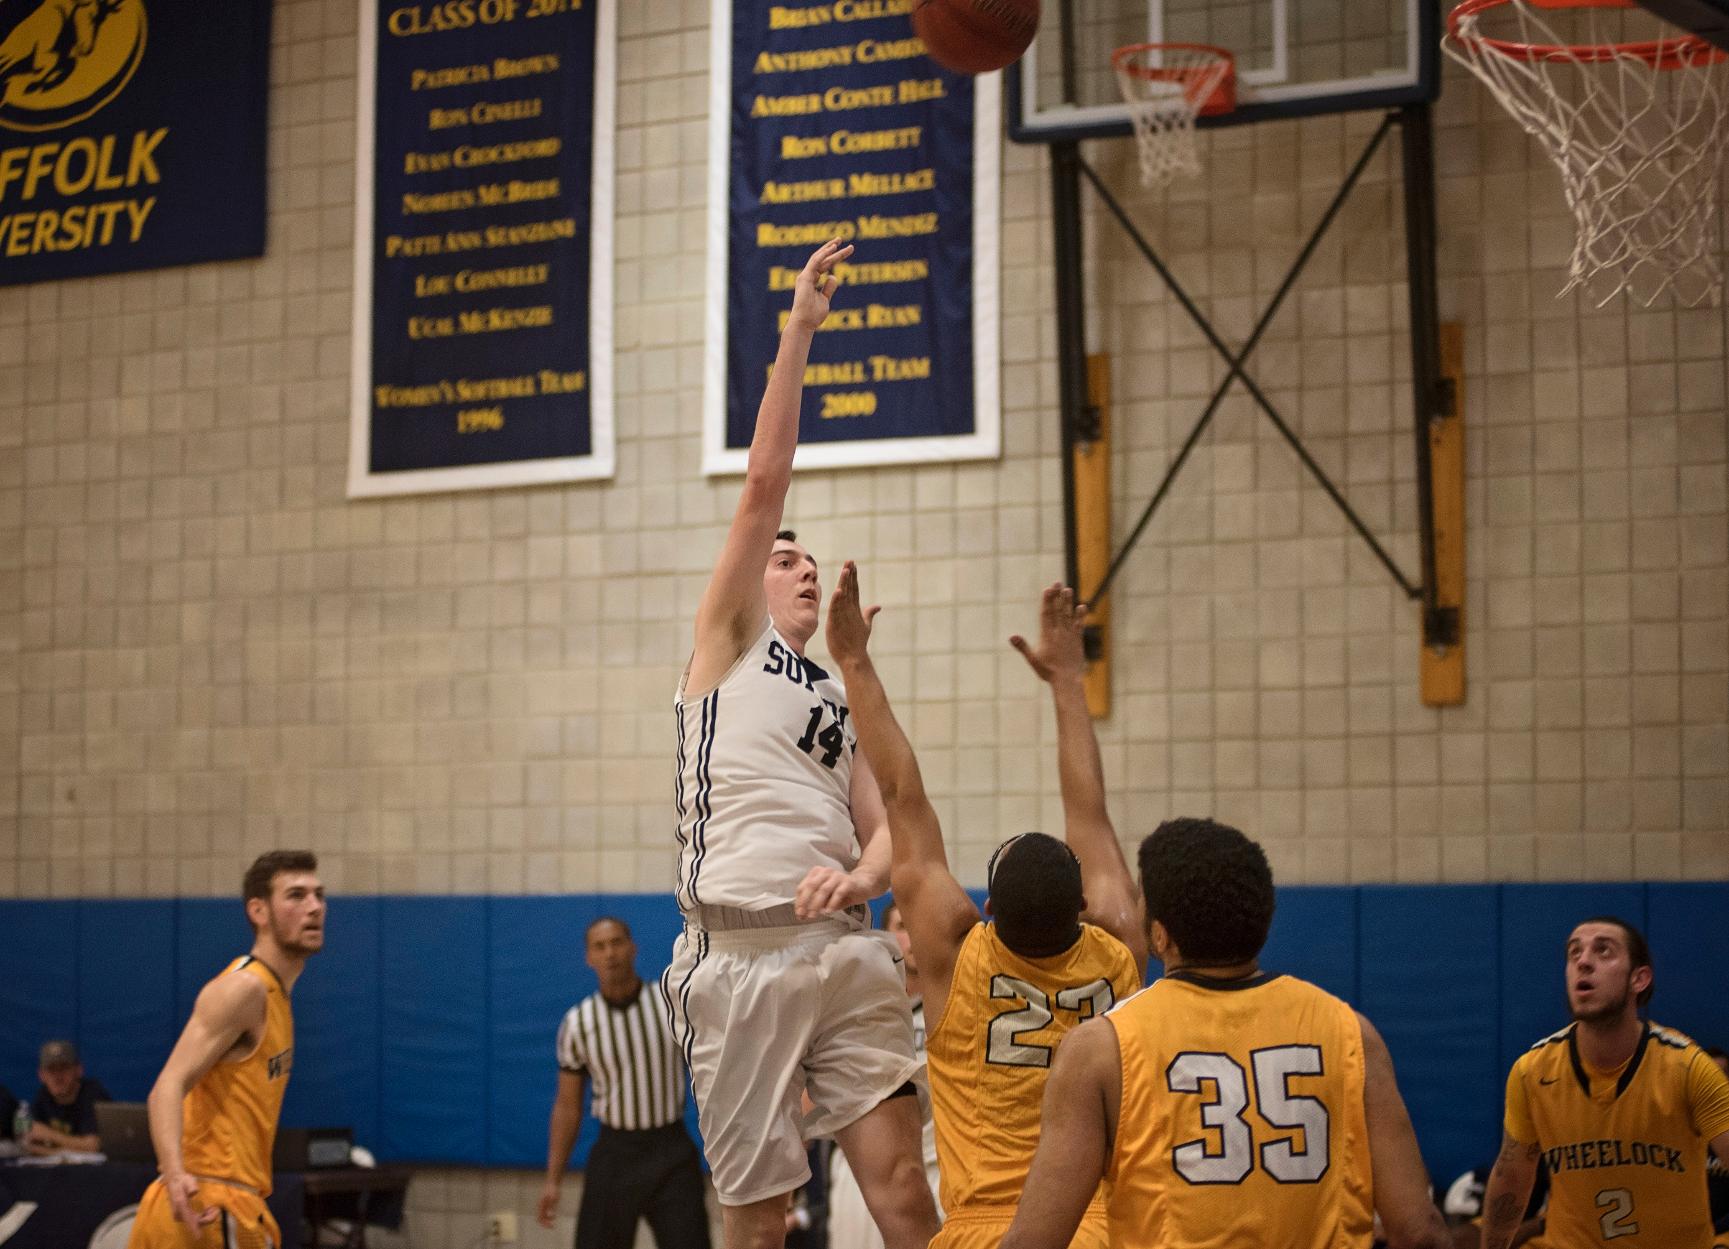 Men’s Basketball Downs Norwich, 61-52, For First GNAC Victory